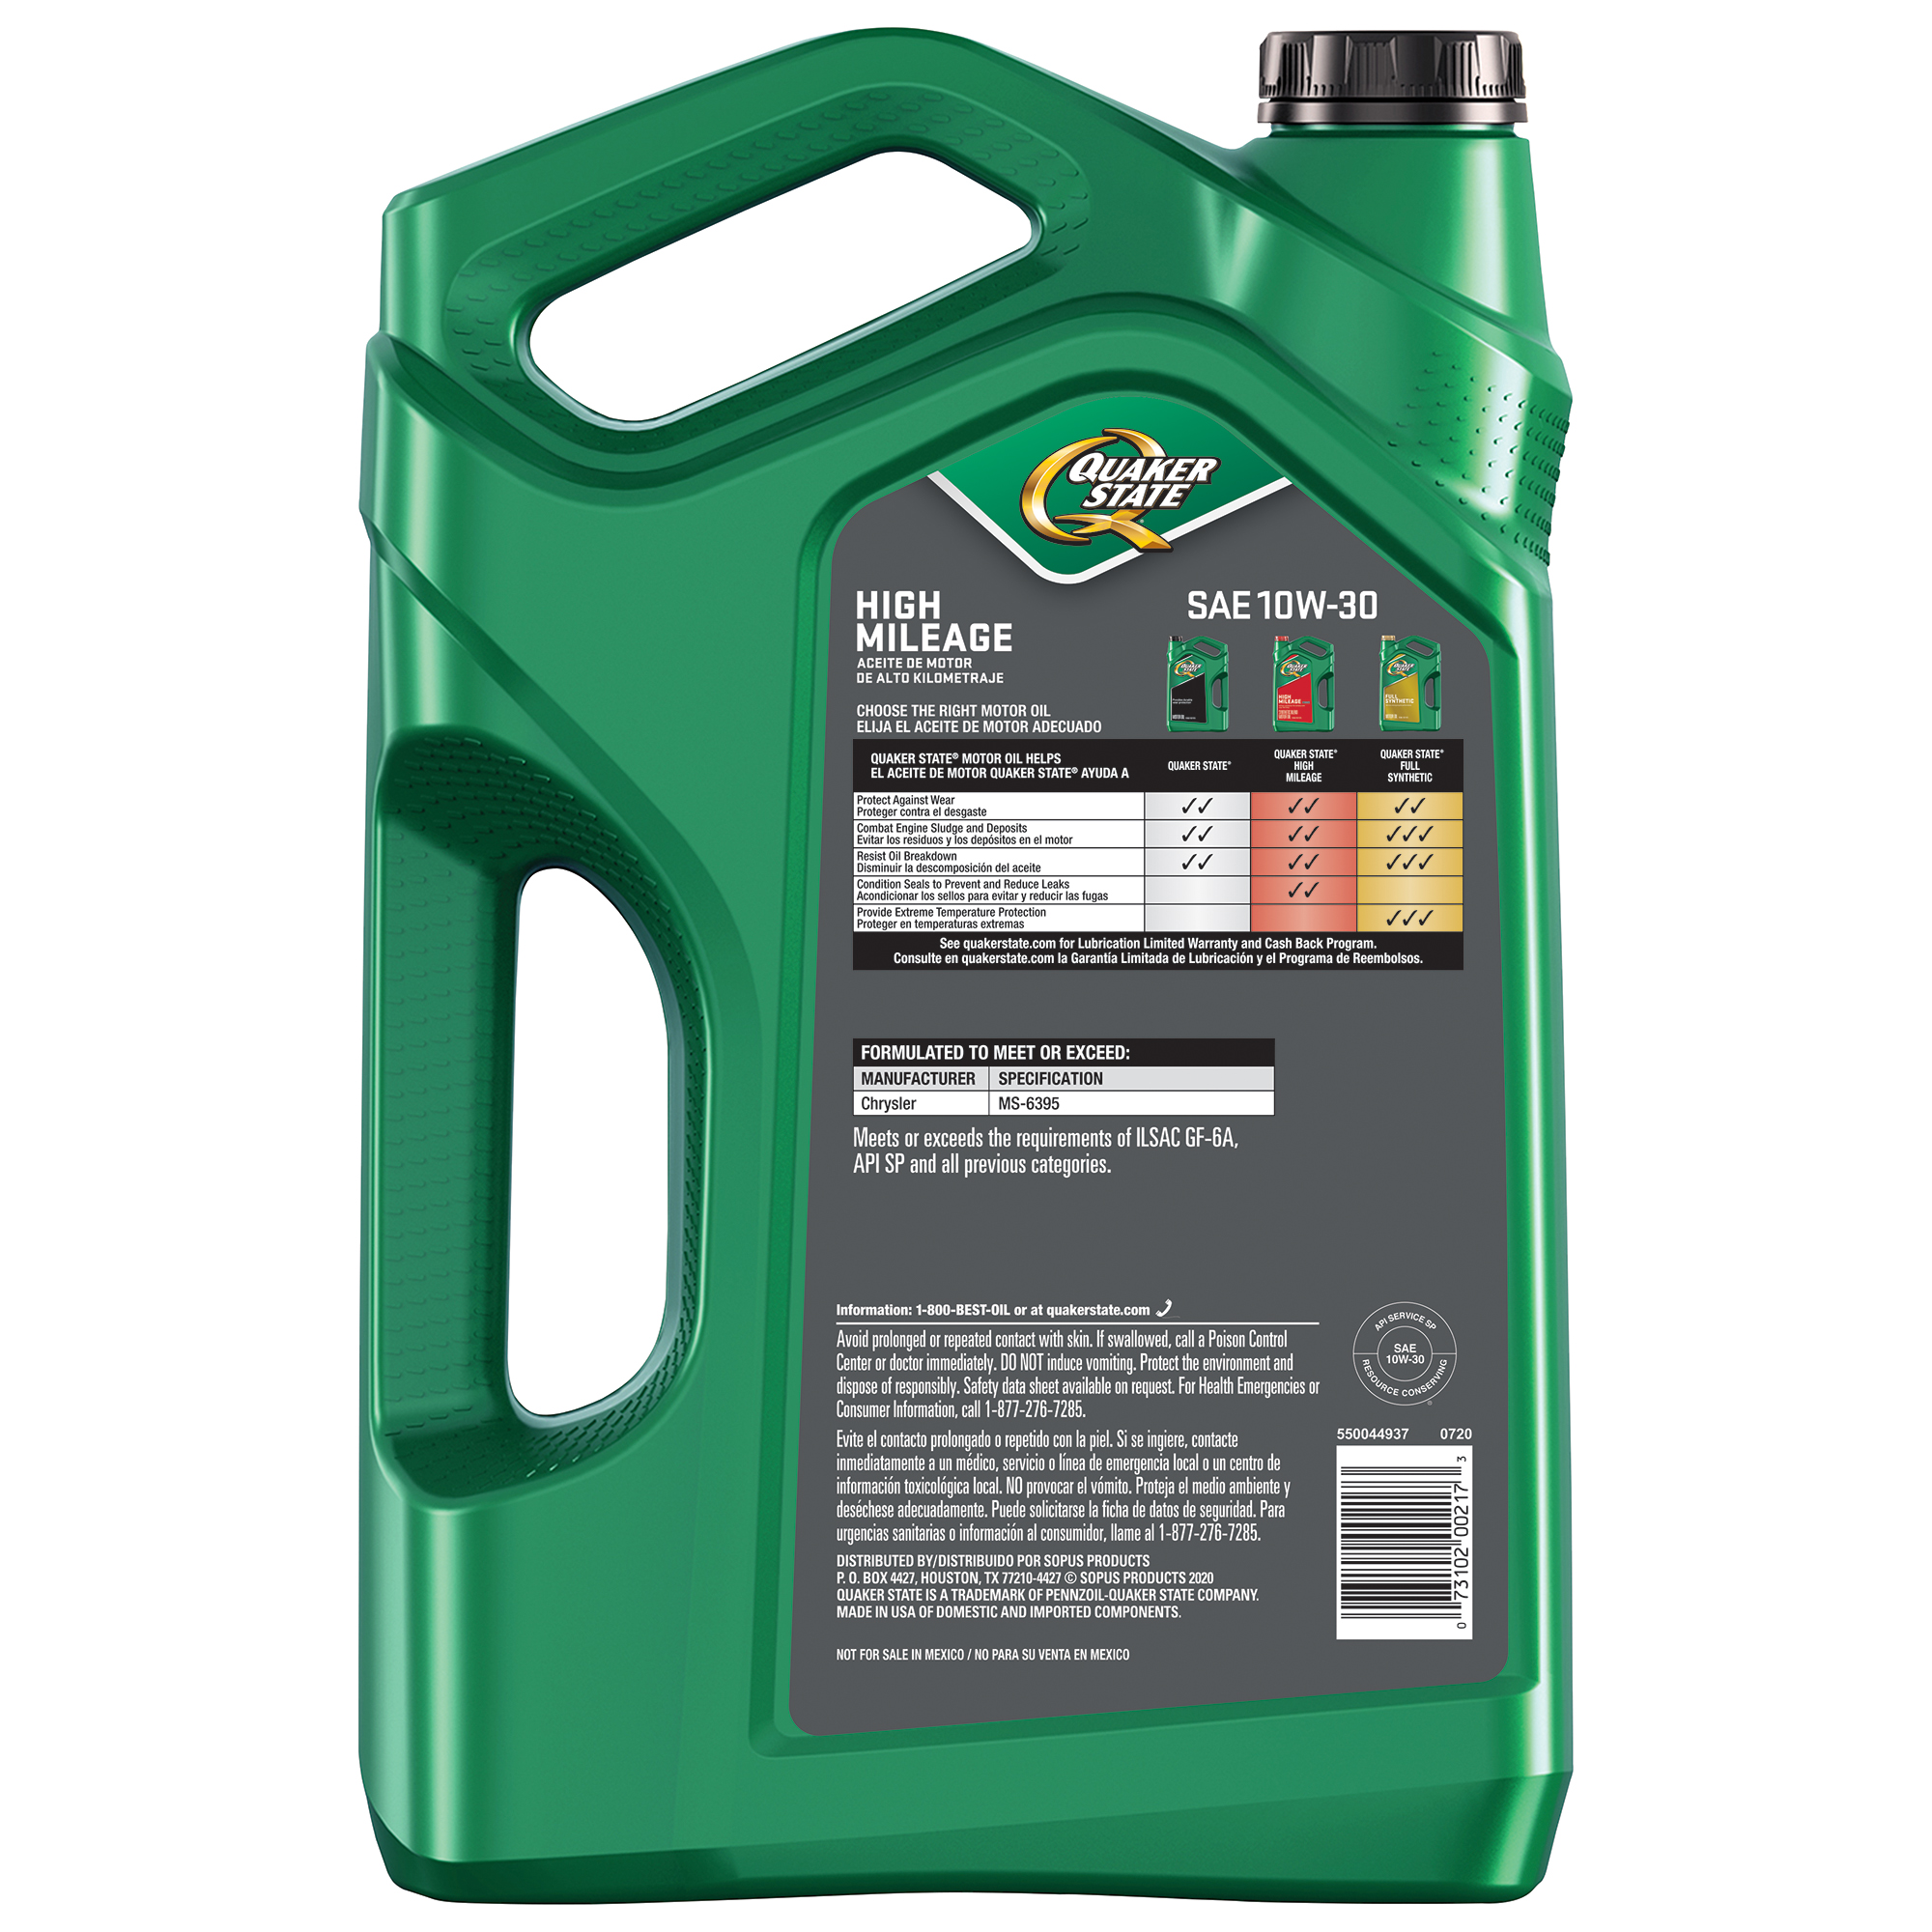 Quaker State High Mileage 10W-30 Synthetic Blend Motor Oil, 5 Quart - image 2 of 4